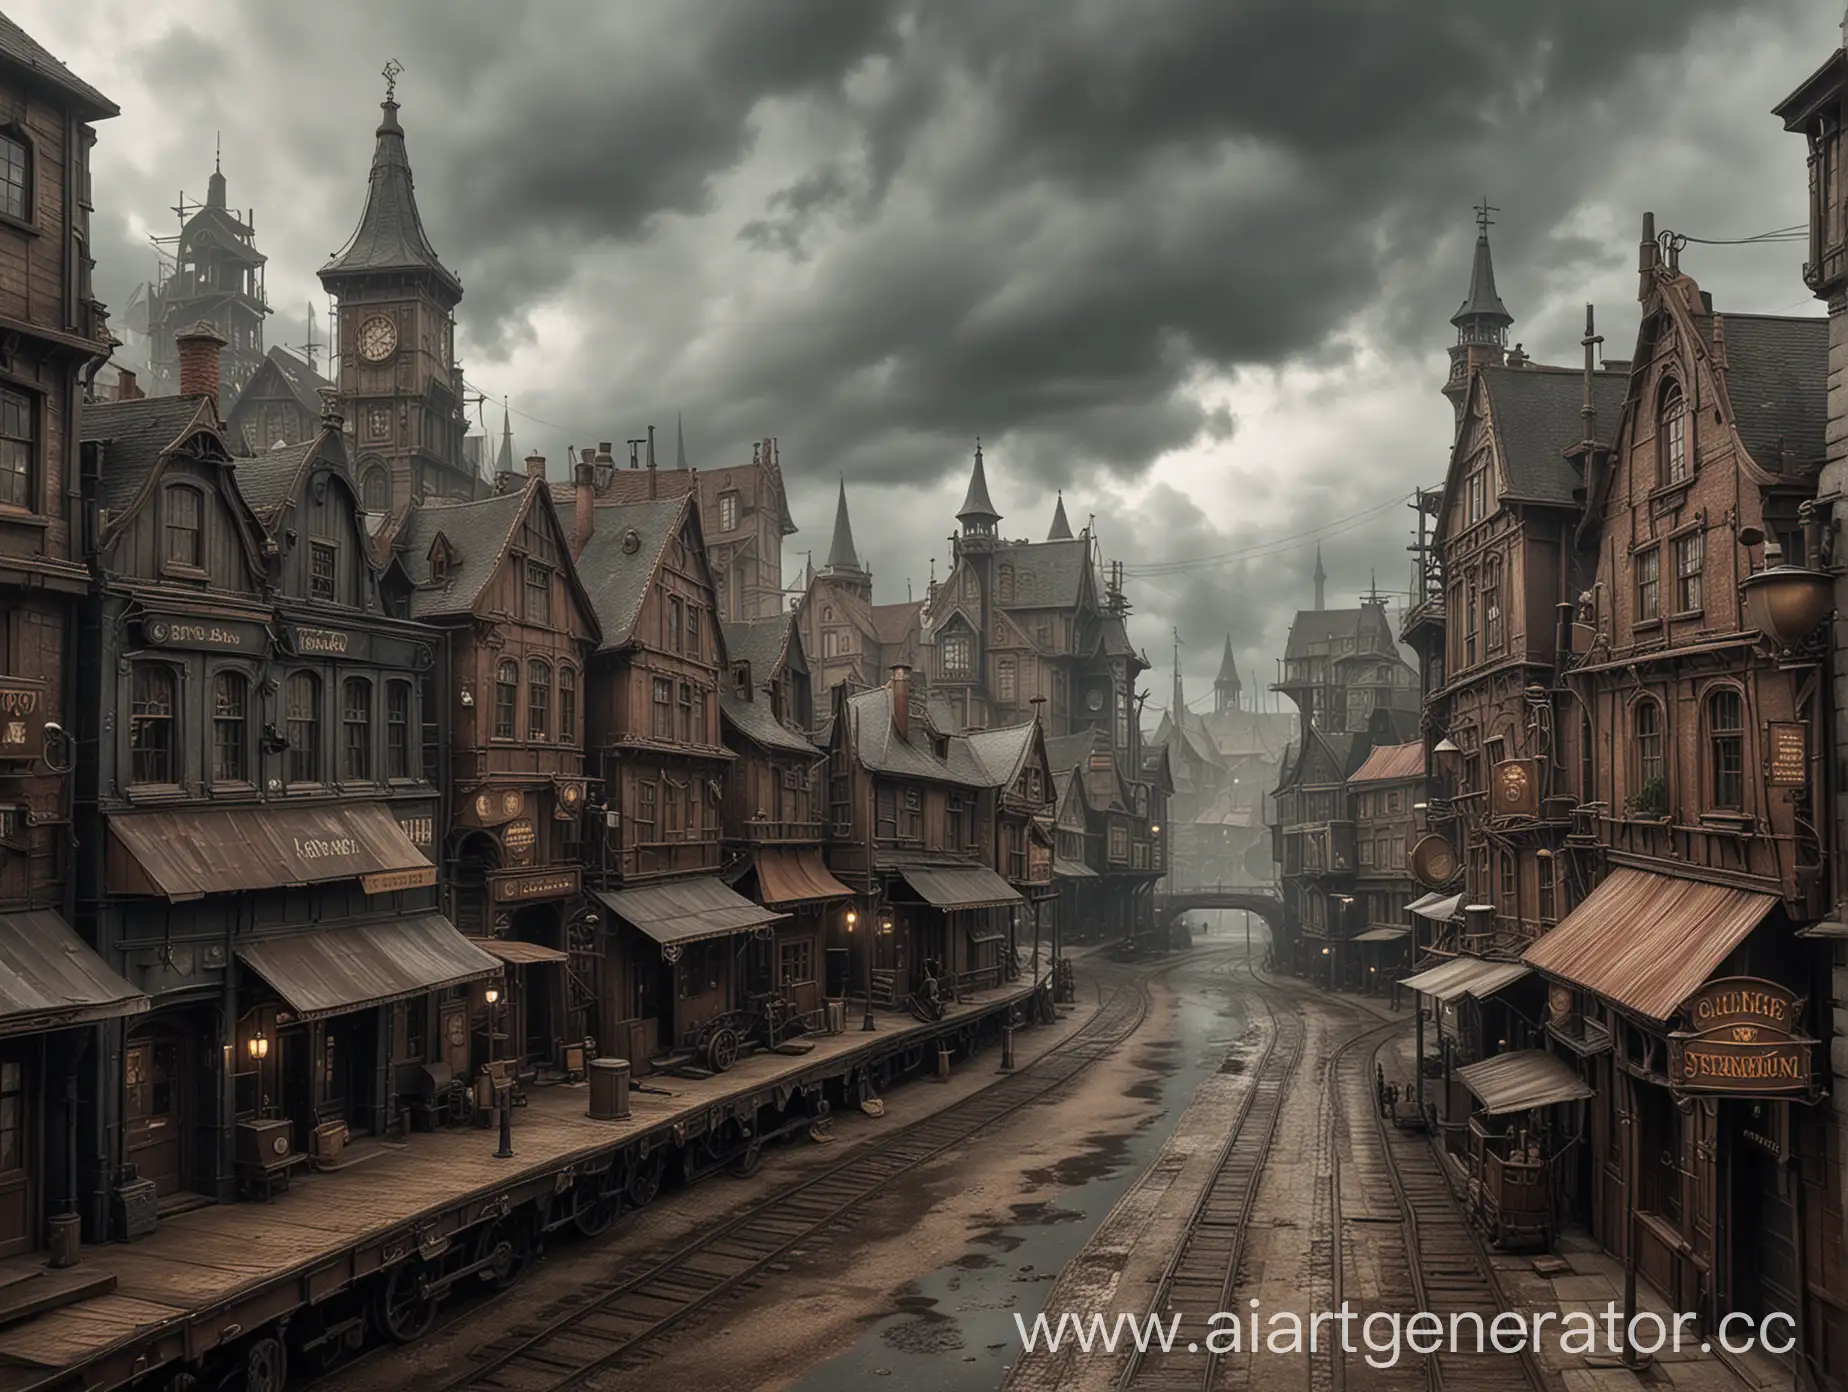 Eerie-Steampunk-Townscape-Industrial-Decay-and-Mysterious-Atmosphere